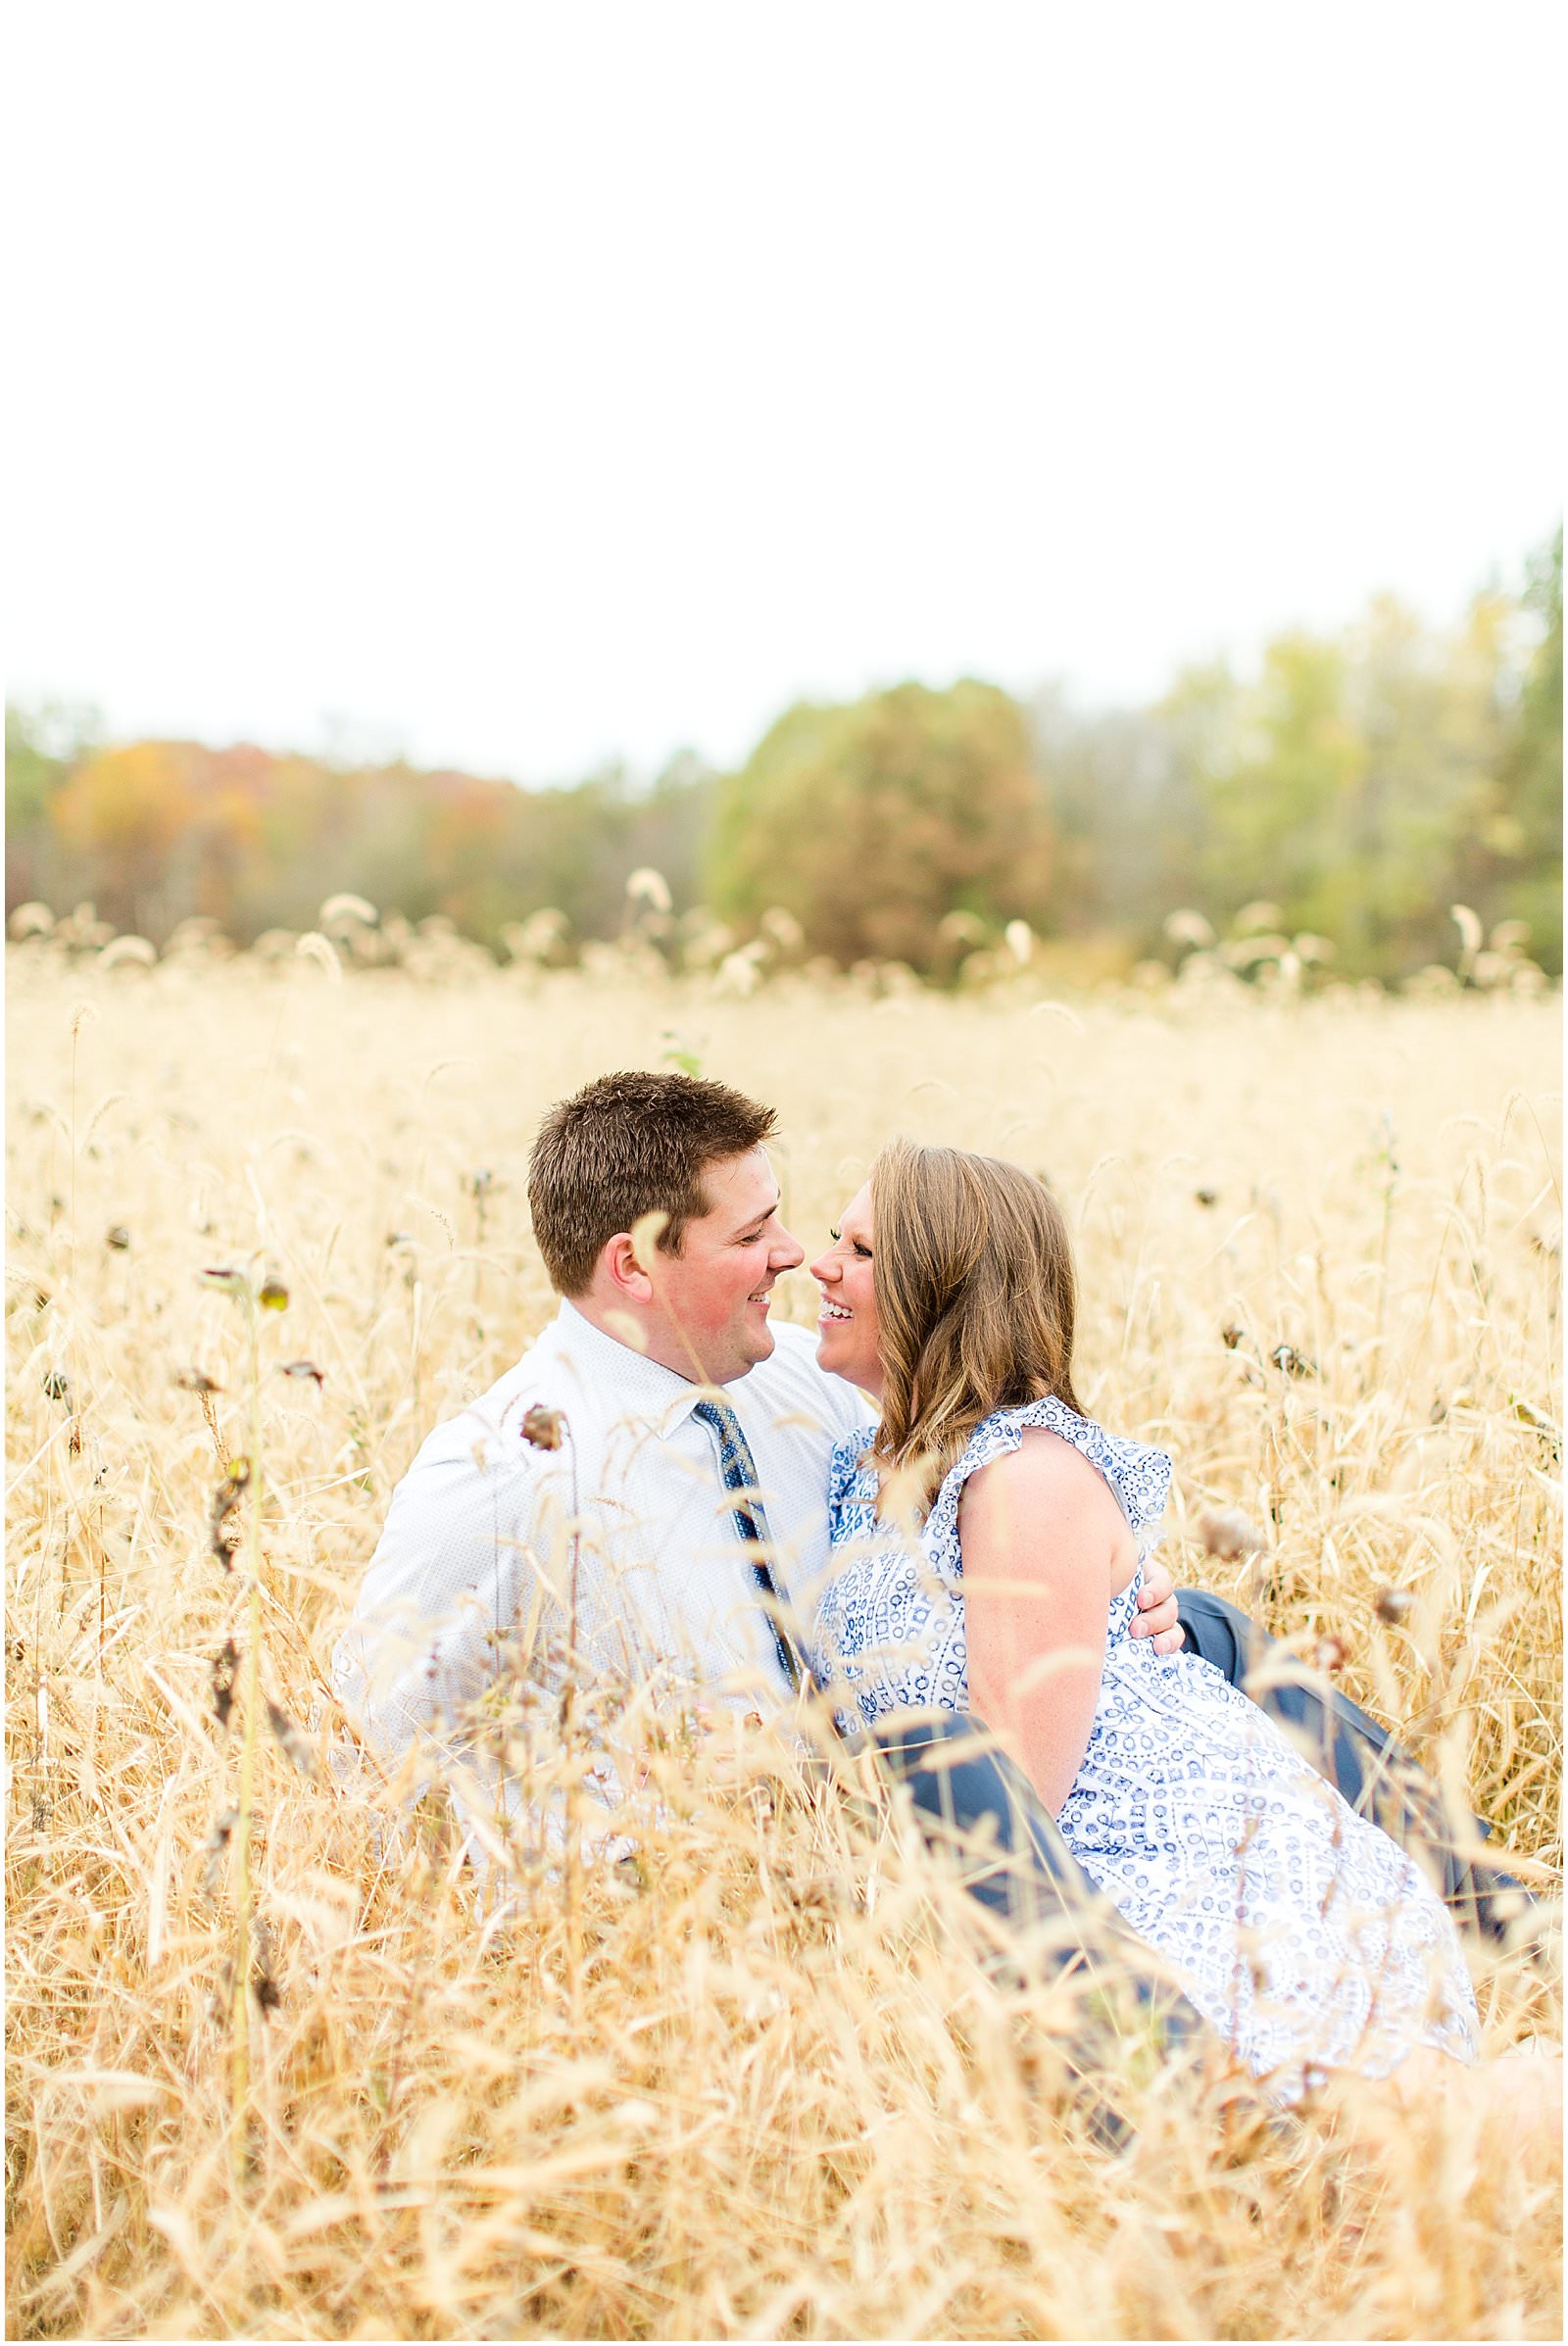 A Southern Illinois Engagement Session | Roxanne and Matthew | Bret and Brandie Photography 0024.jpg